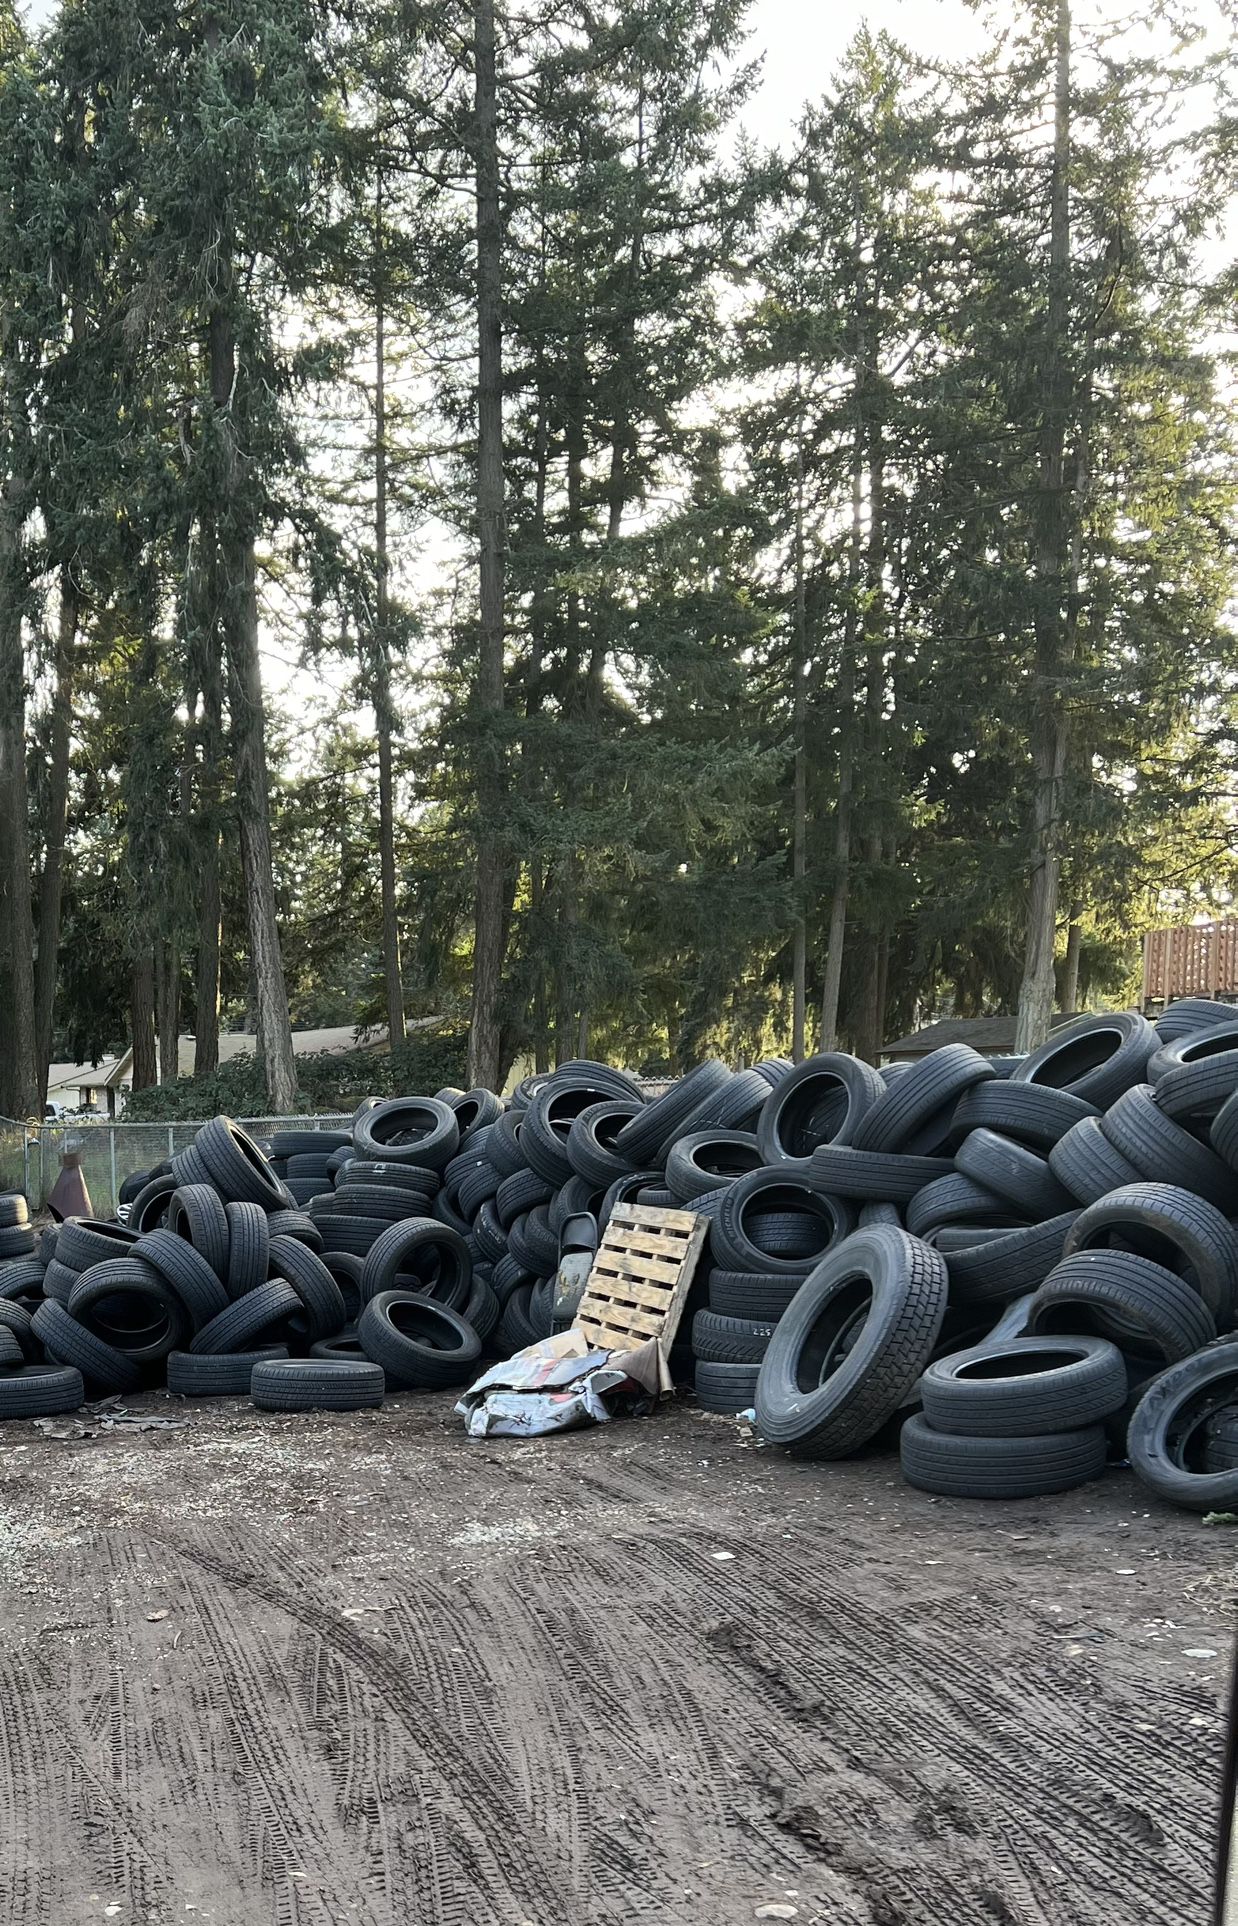 FREE TIRES…FREE TIRES 